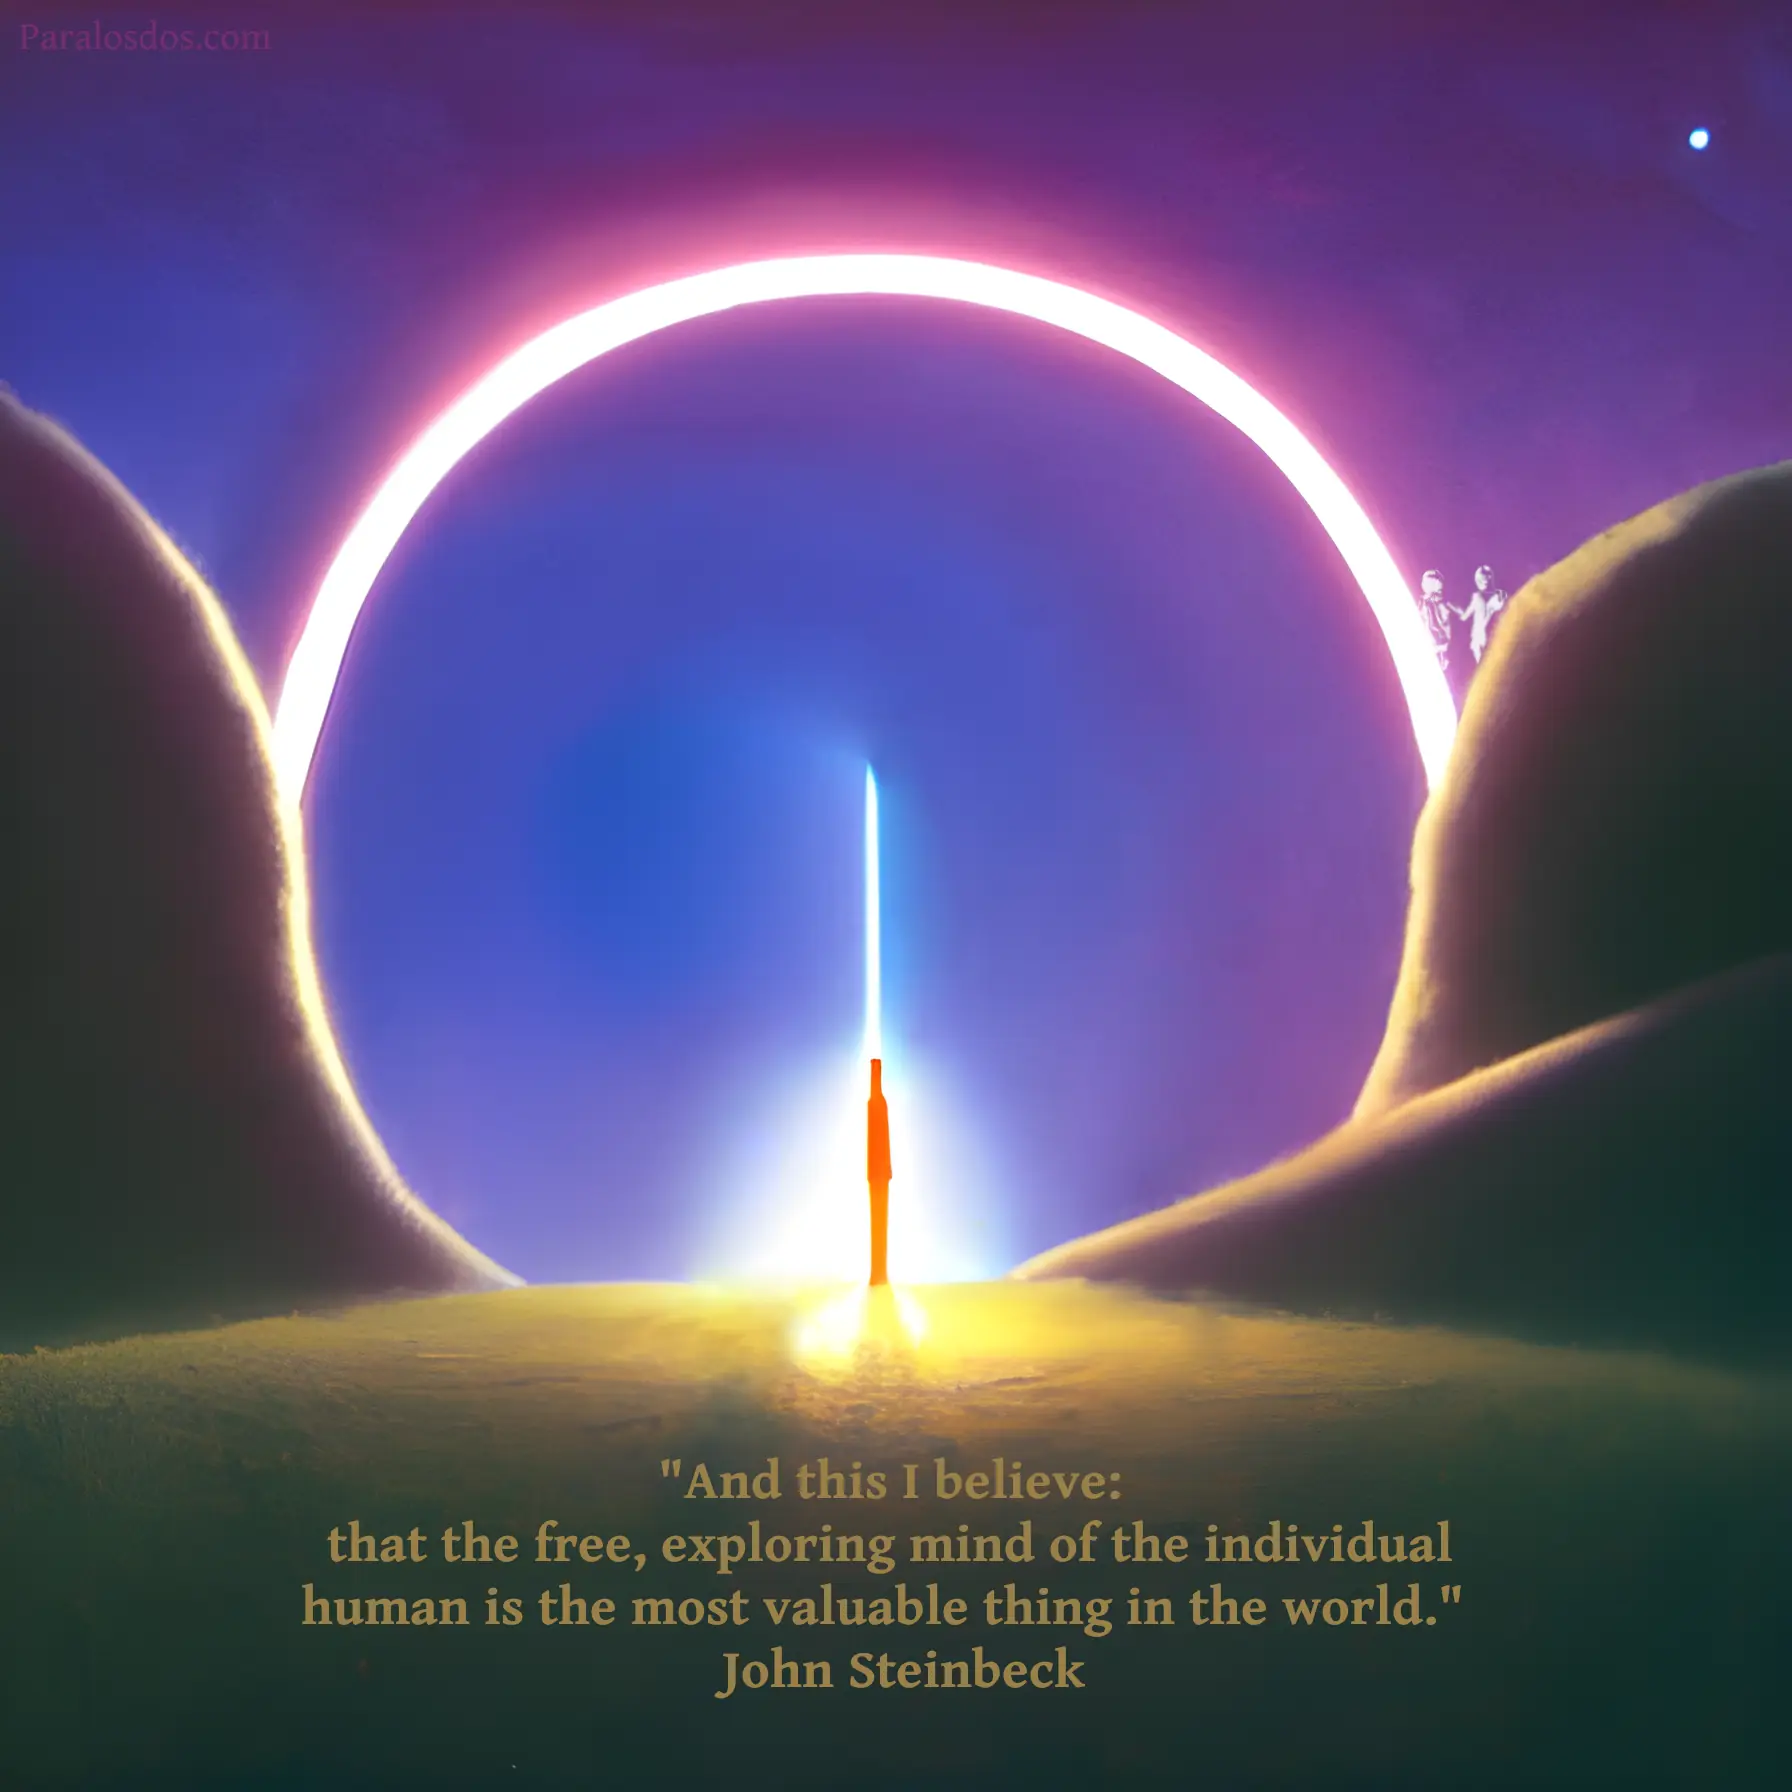 A fantastical artistic rendering of a figure standing in a shaft of light that looks like a slot in a portal. The quote reads: "And this I believe: that the free, exploring mind of the individual human is the most valuable thing in the world.And this I believe: that the free, exploring mind of the individual human is the most valuable thing in the world." – John Steinbeck